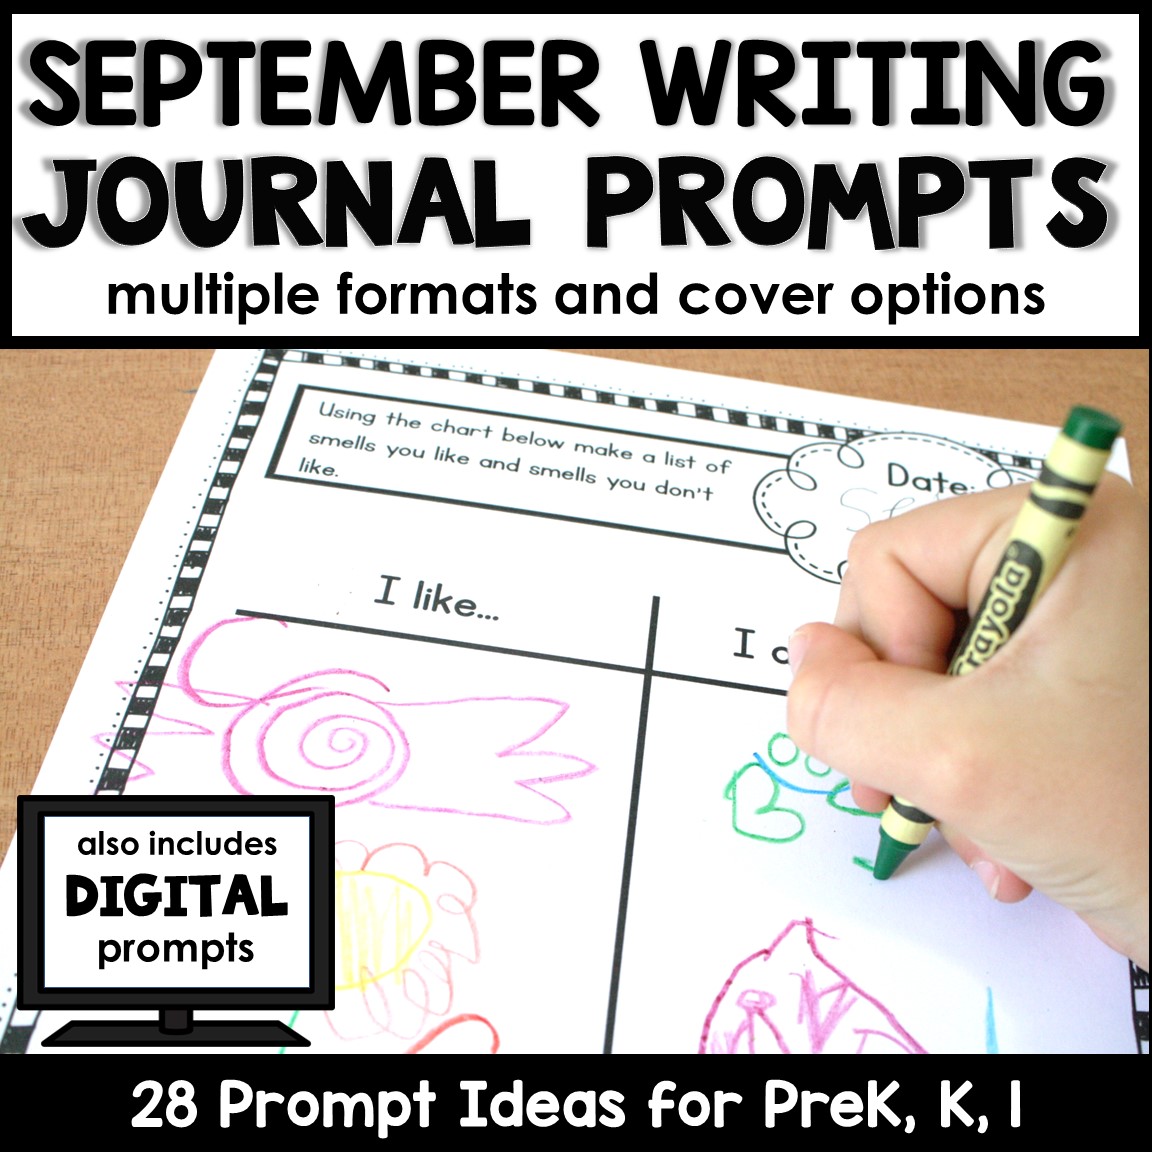 September Writing Journal Prompts